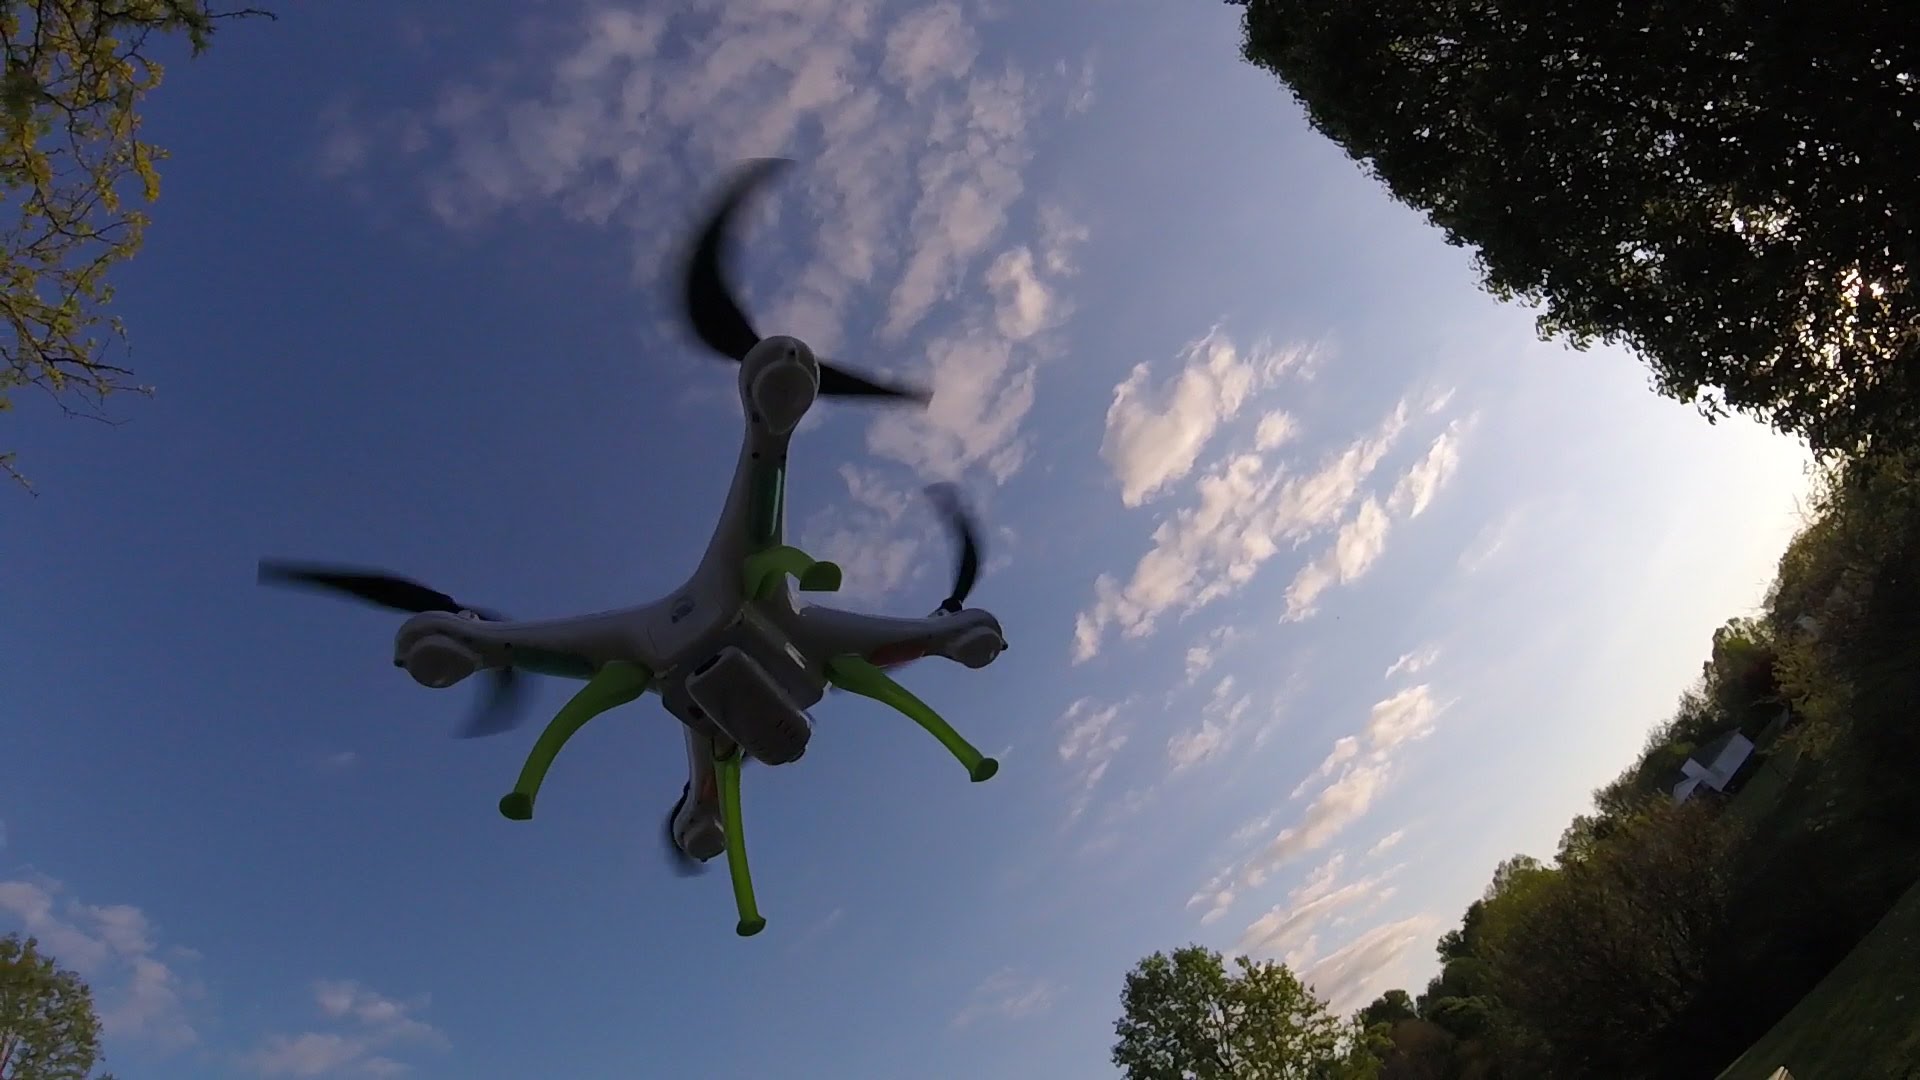 Syma X5HC Quadcopter Unboxing and Review